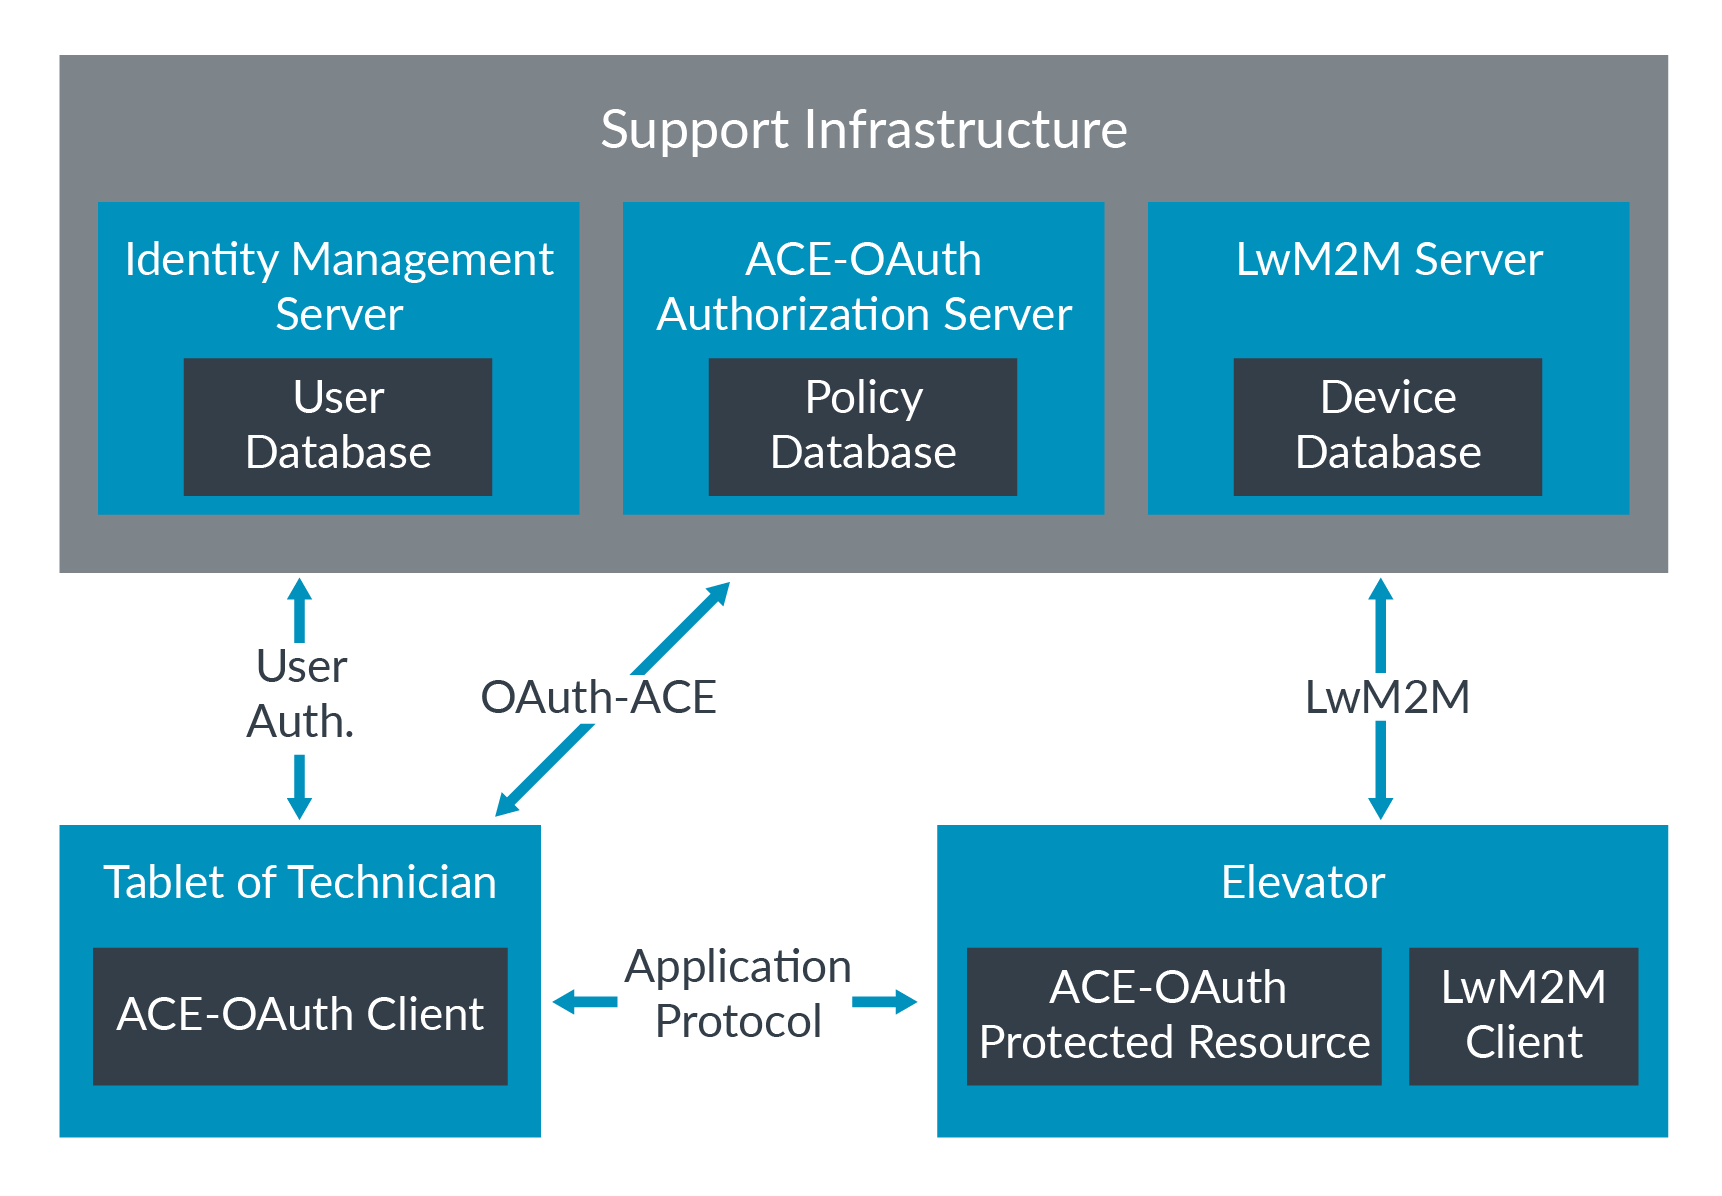 OAuth-ACE Architecture with LwM2M Integration.